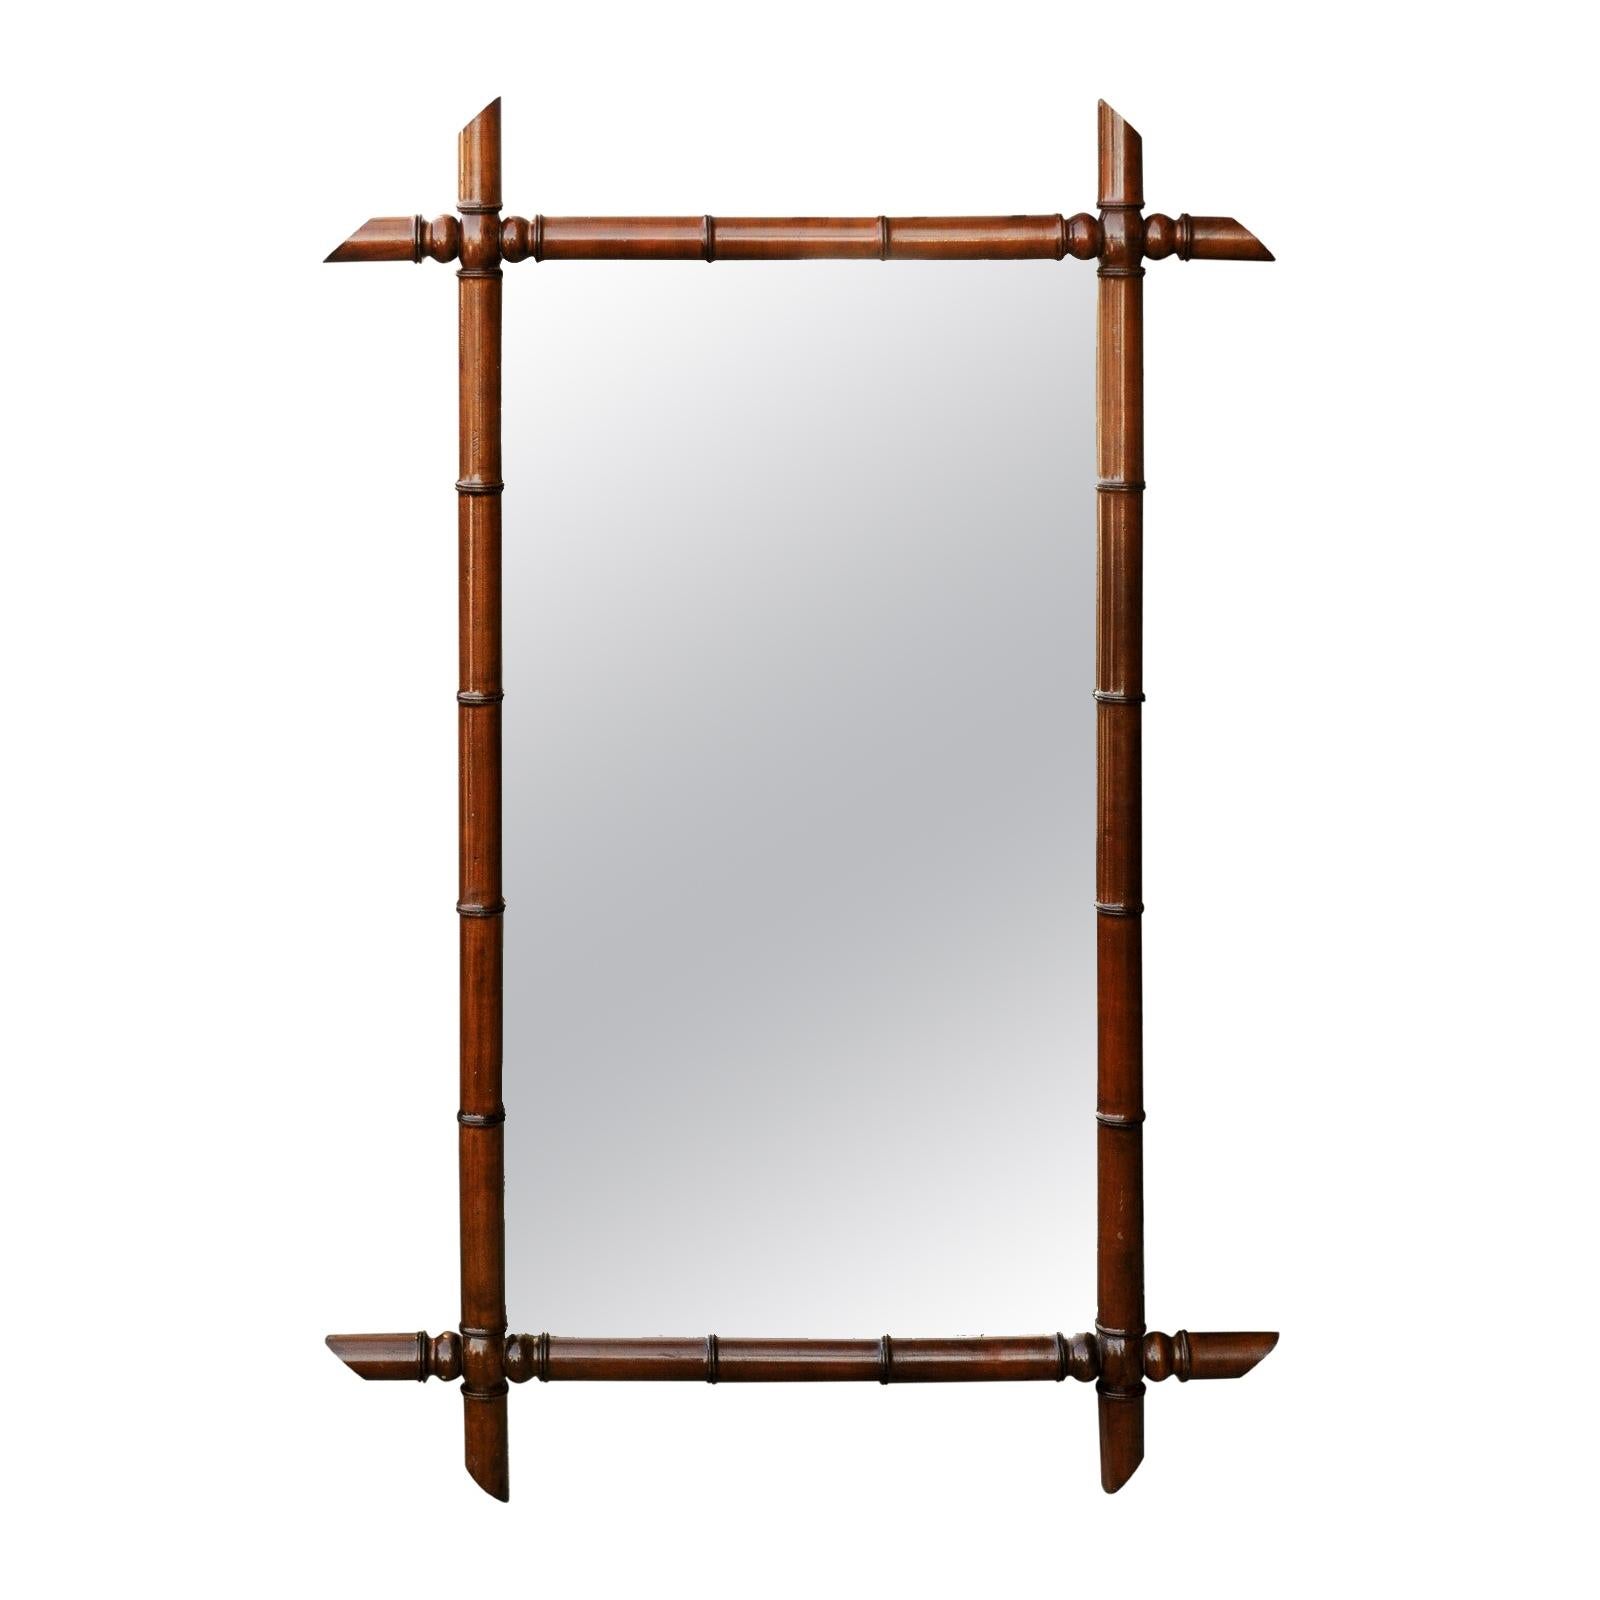 French 1900s Faux Bamboo Turn of the Century Mirror with Protruding Corners